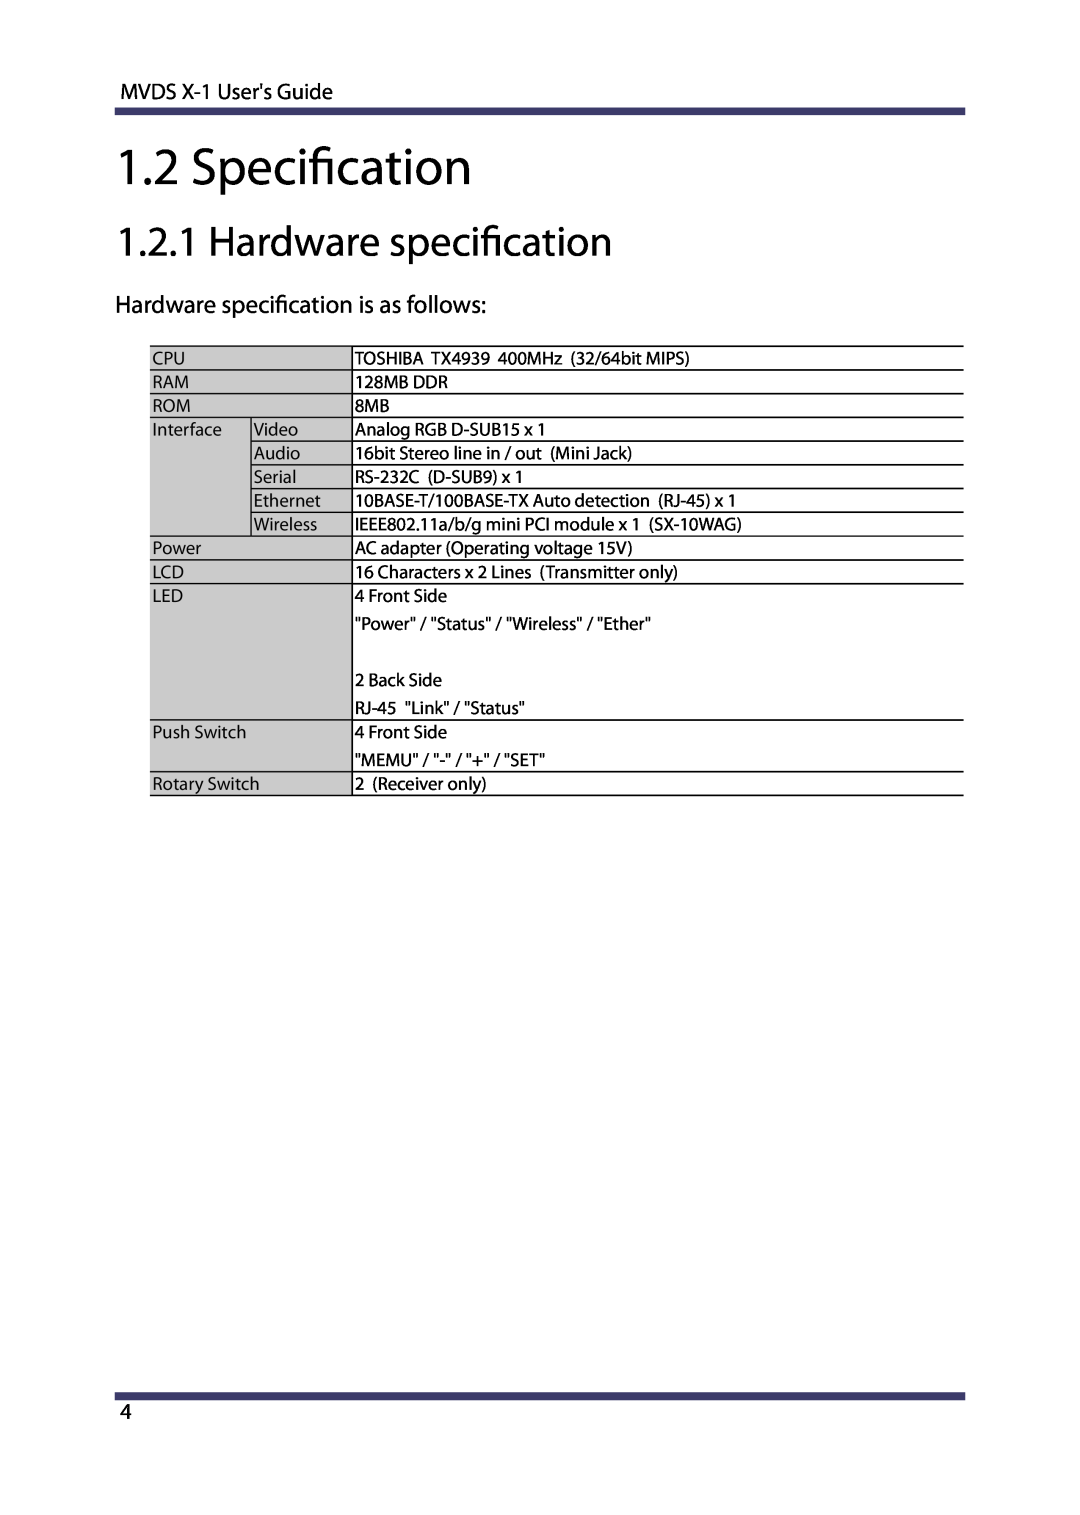 Silex technology MVDS X-1 manual 1.2Specification, 1.2.1Hardware specification 